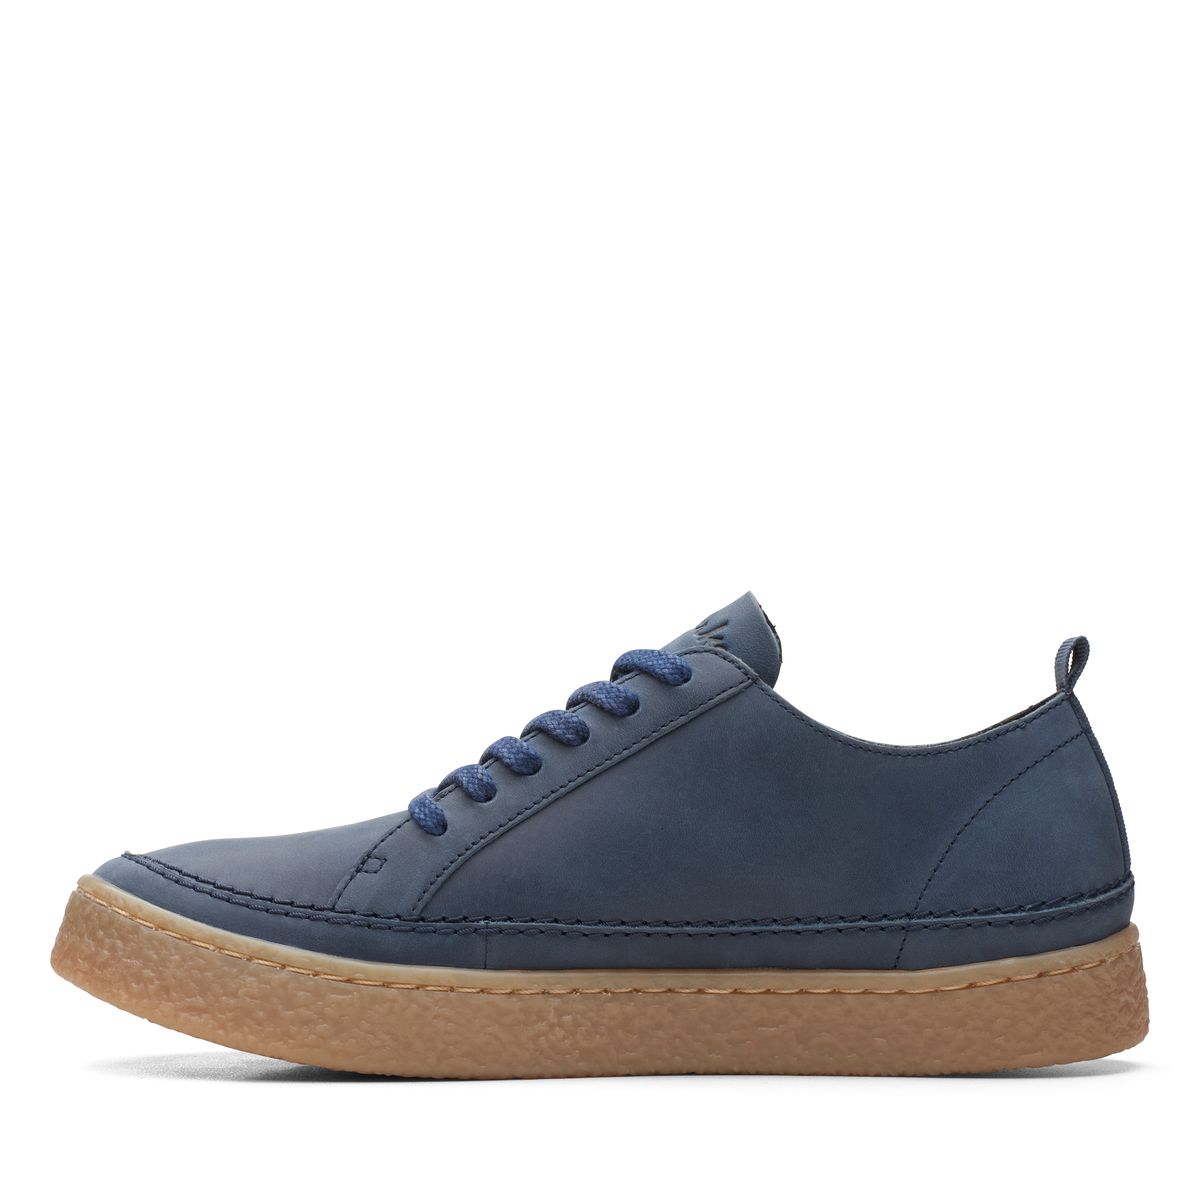 Clarks Barleigh Lace D Fit Navy Leather lacing shoes